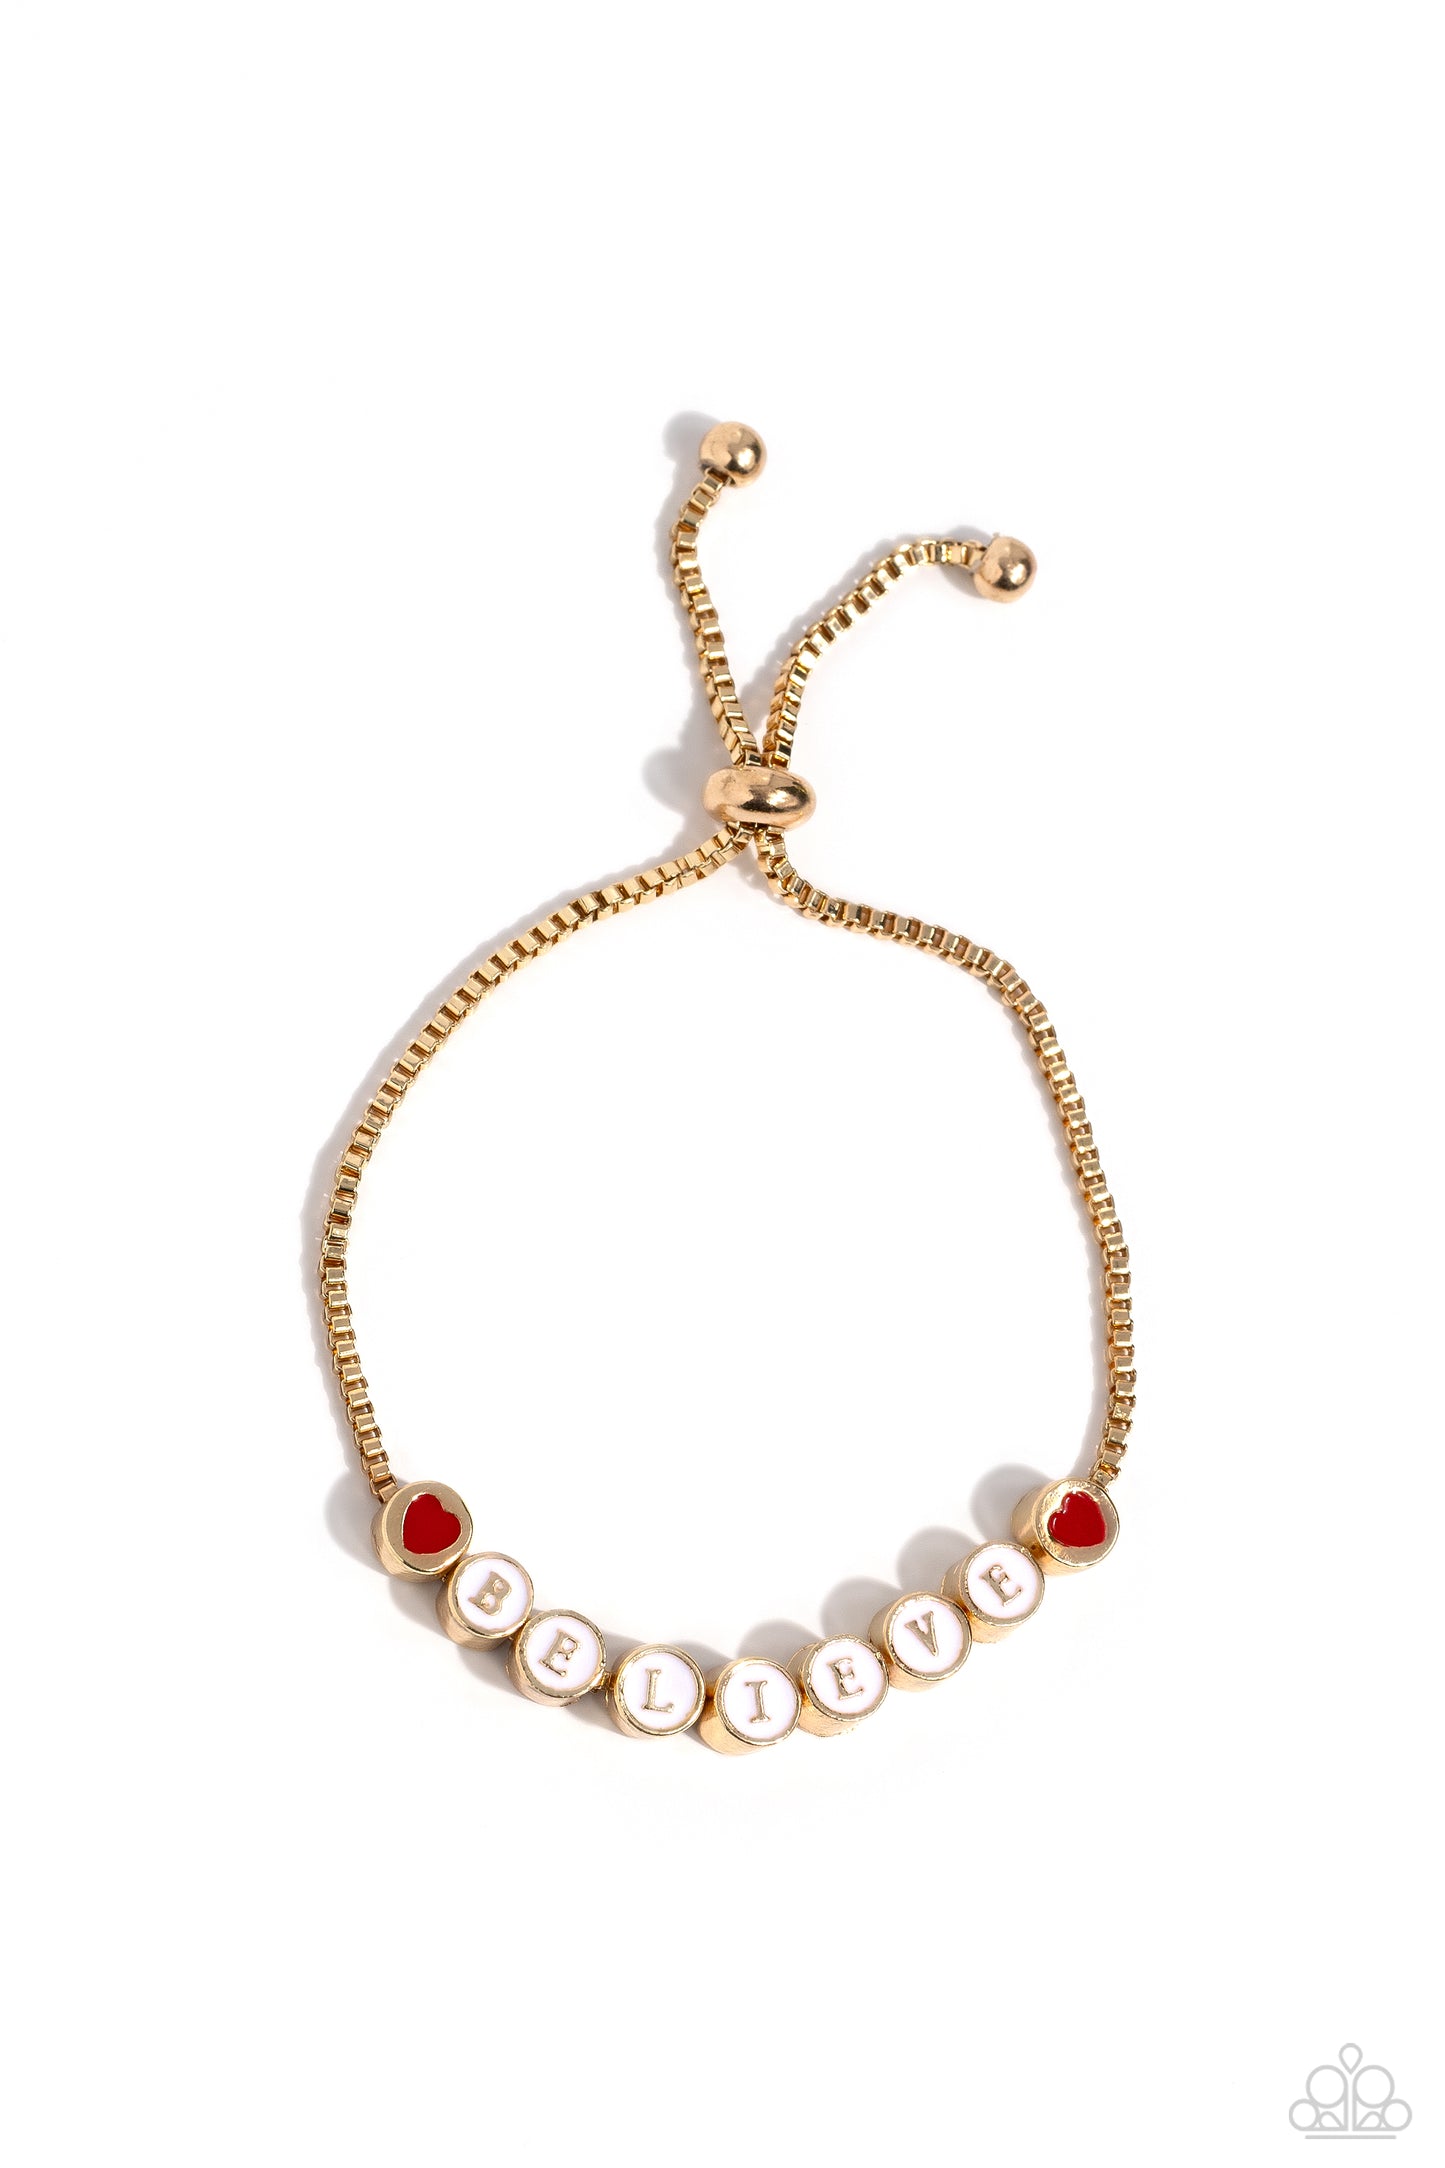 I Cant Believe It! Gold Sliding Bead Bracelet - Paparazzi Accessories  Delicately attached to a dainty gold box chain, thick circular gold fittings spell out the word "BELIEVE" across a white-painted backdrop with red-painted hearts embellishing the ends of the word, creating a sleek inspiring display. Features an adjustable sliding bead closure.  Sold as one individual bracelet.  Sku:  P9WD-GDXX-197XX